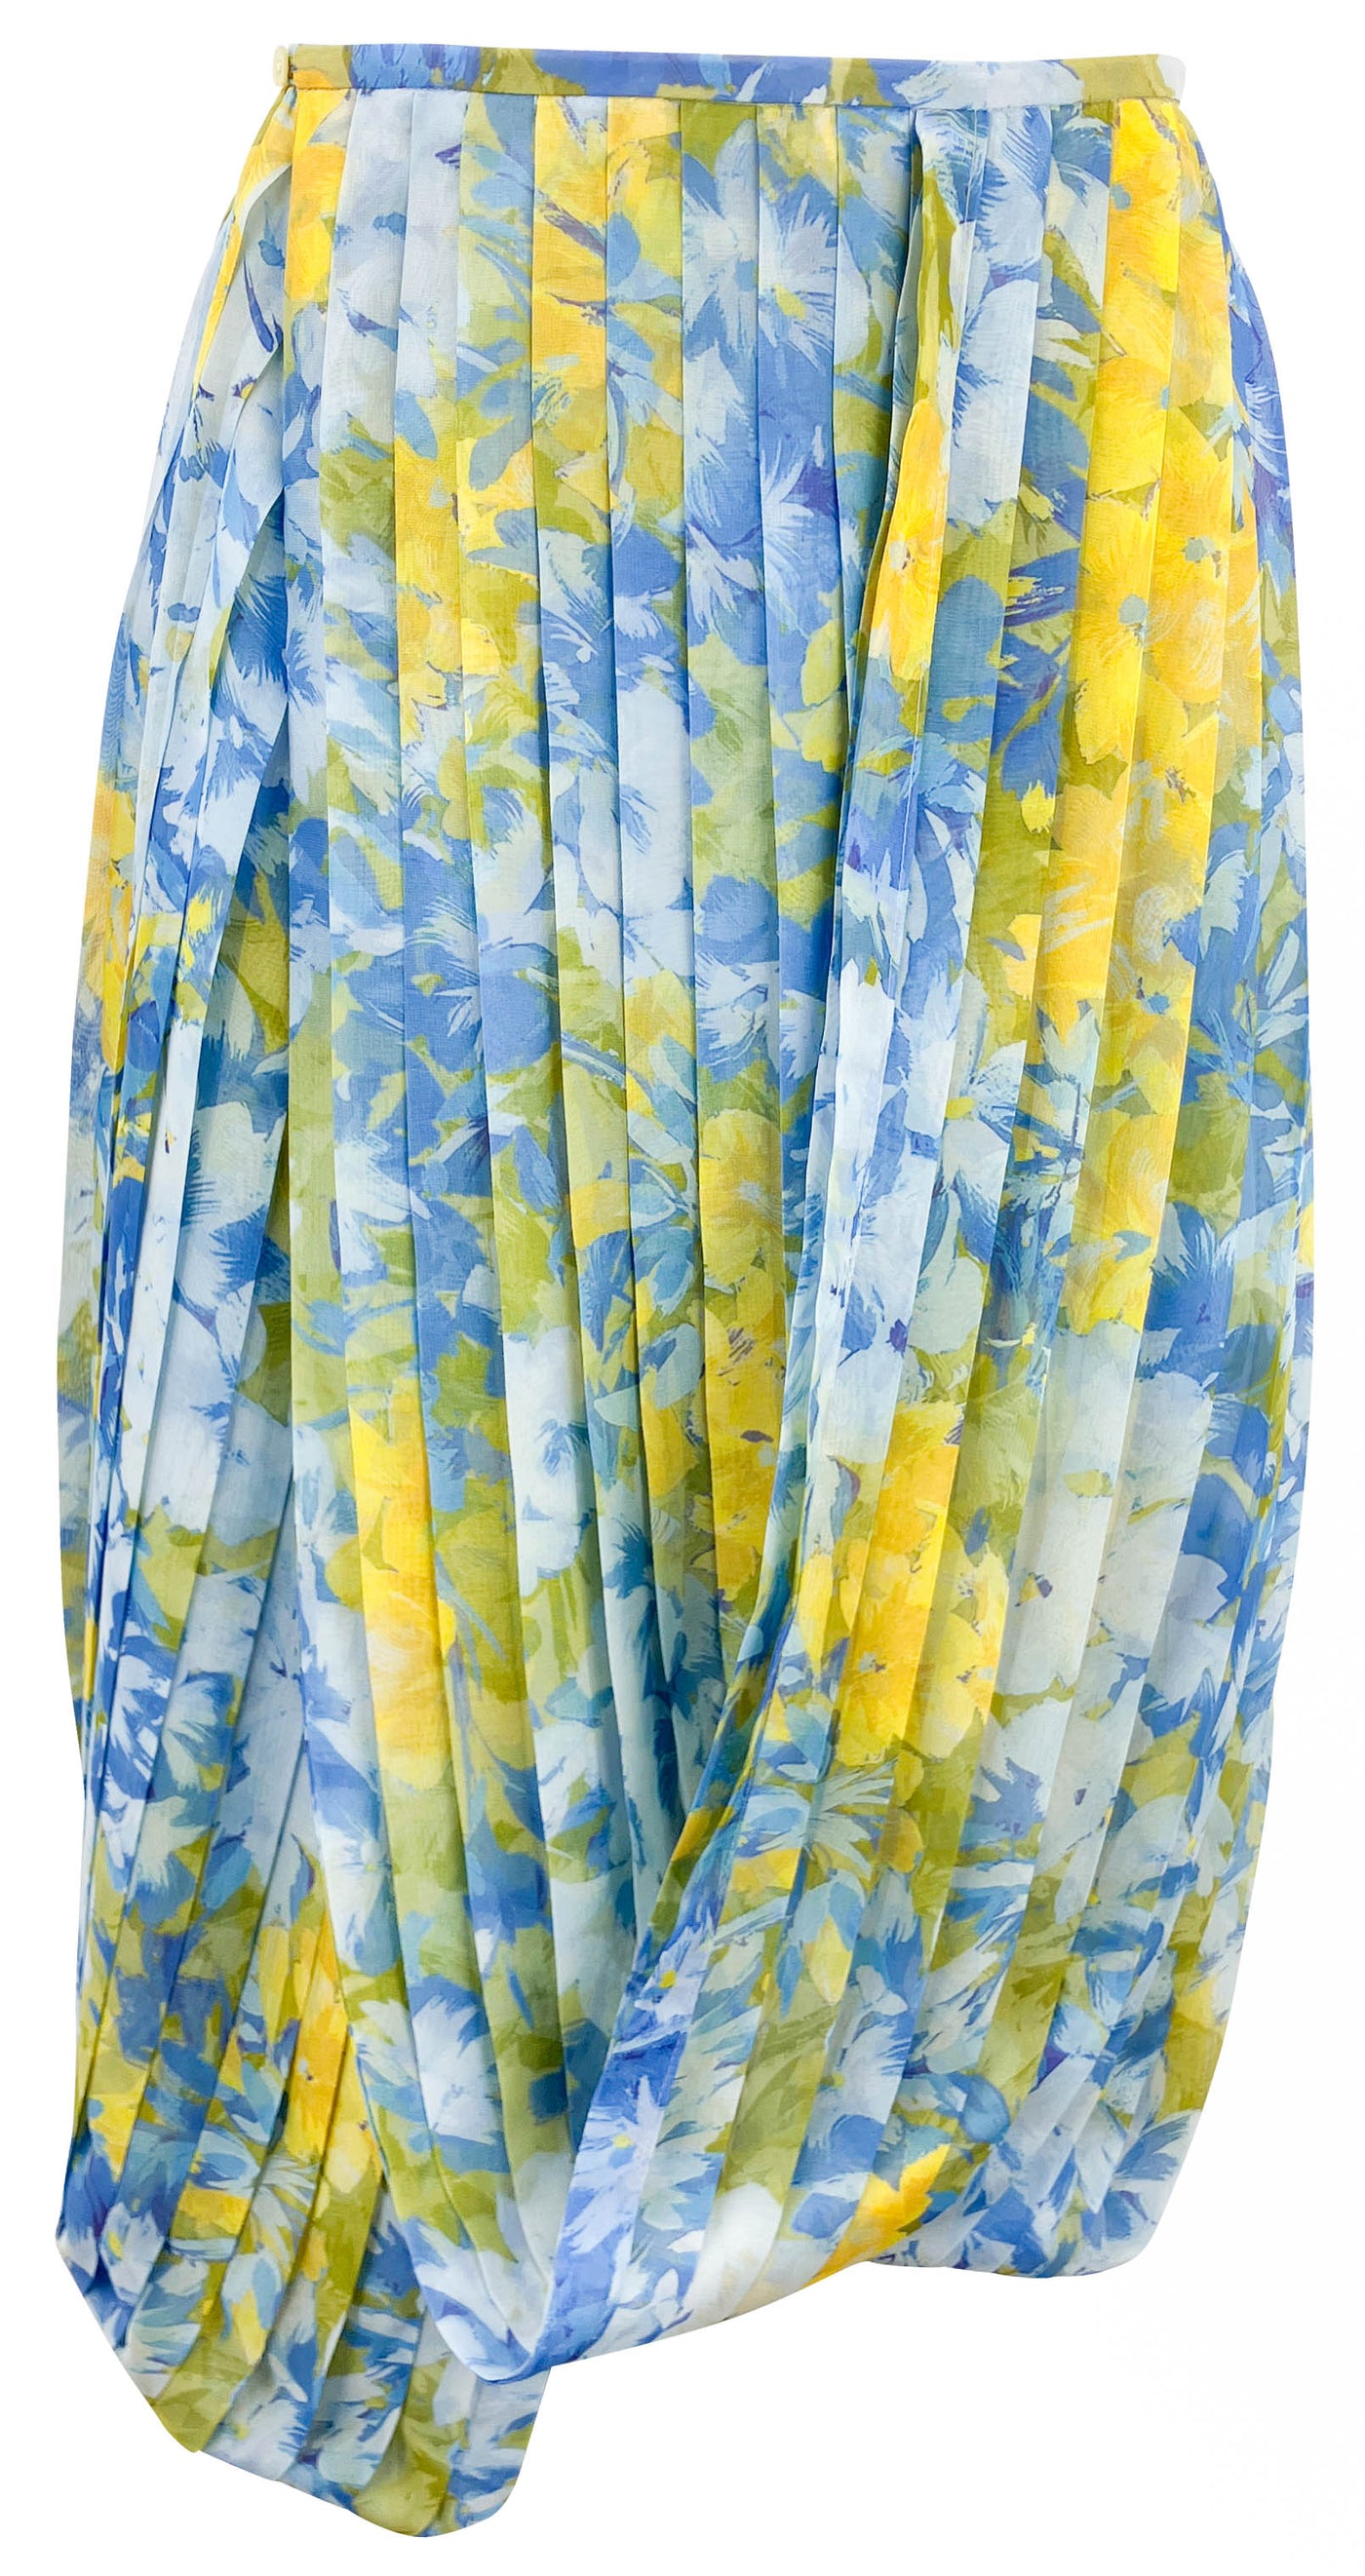 Dries Van Noten Floral Printed Chiffon Midi Skirt in Blue and Yellow - Discounts on Dries Van Noten at UAL